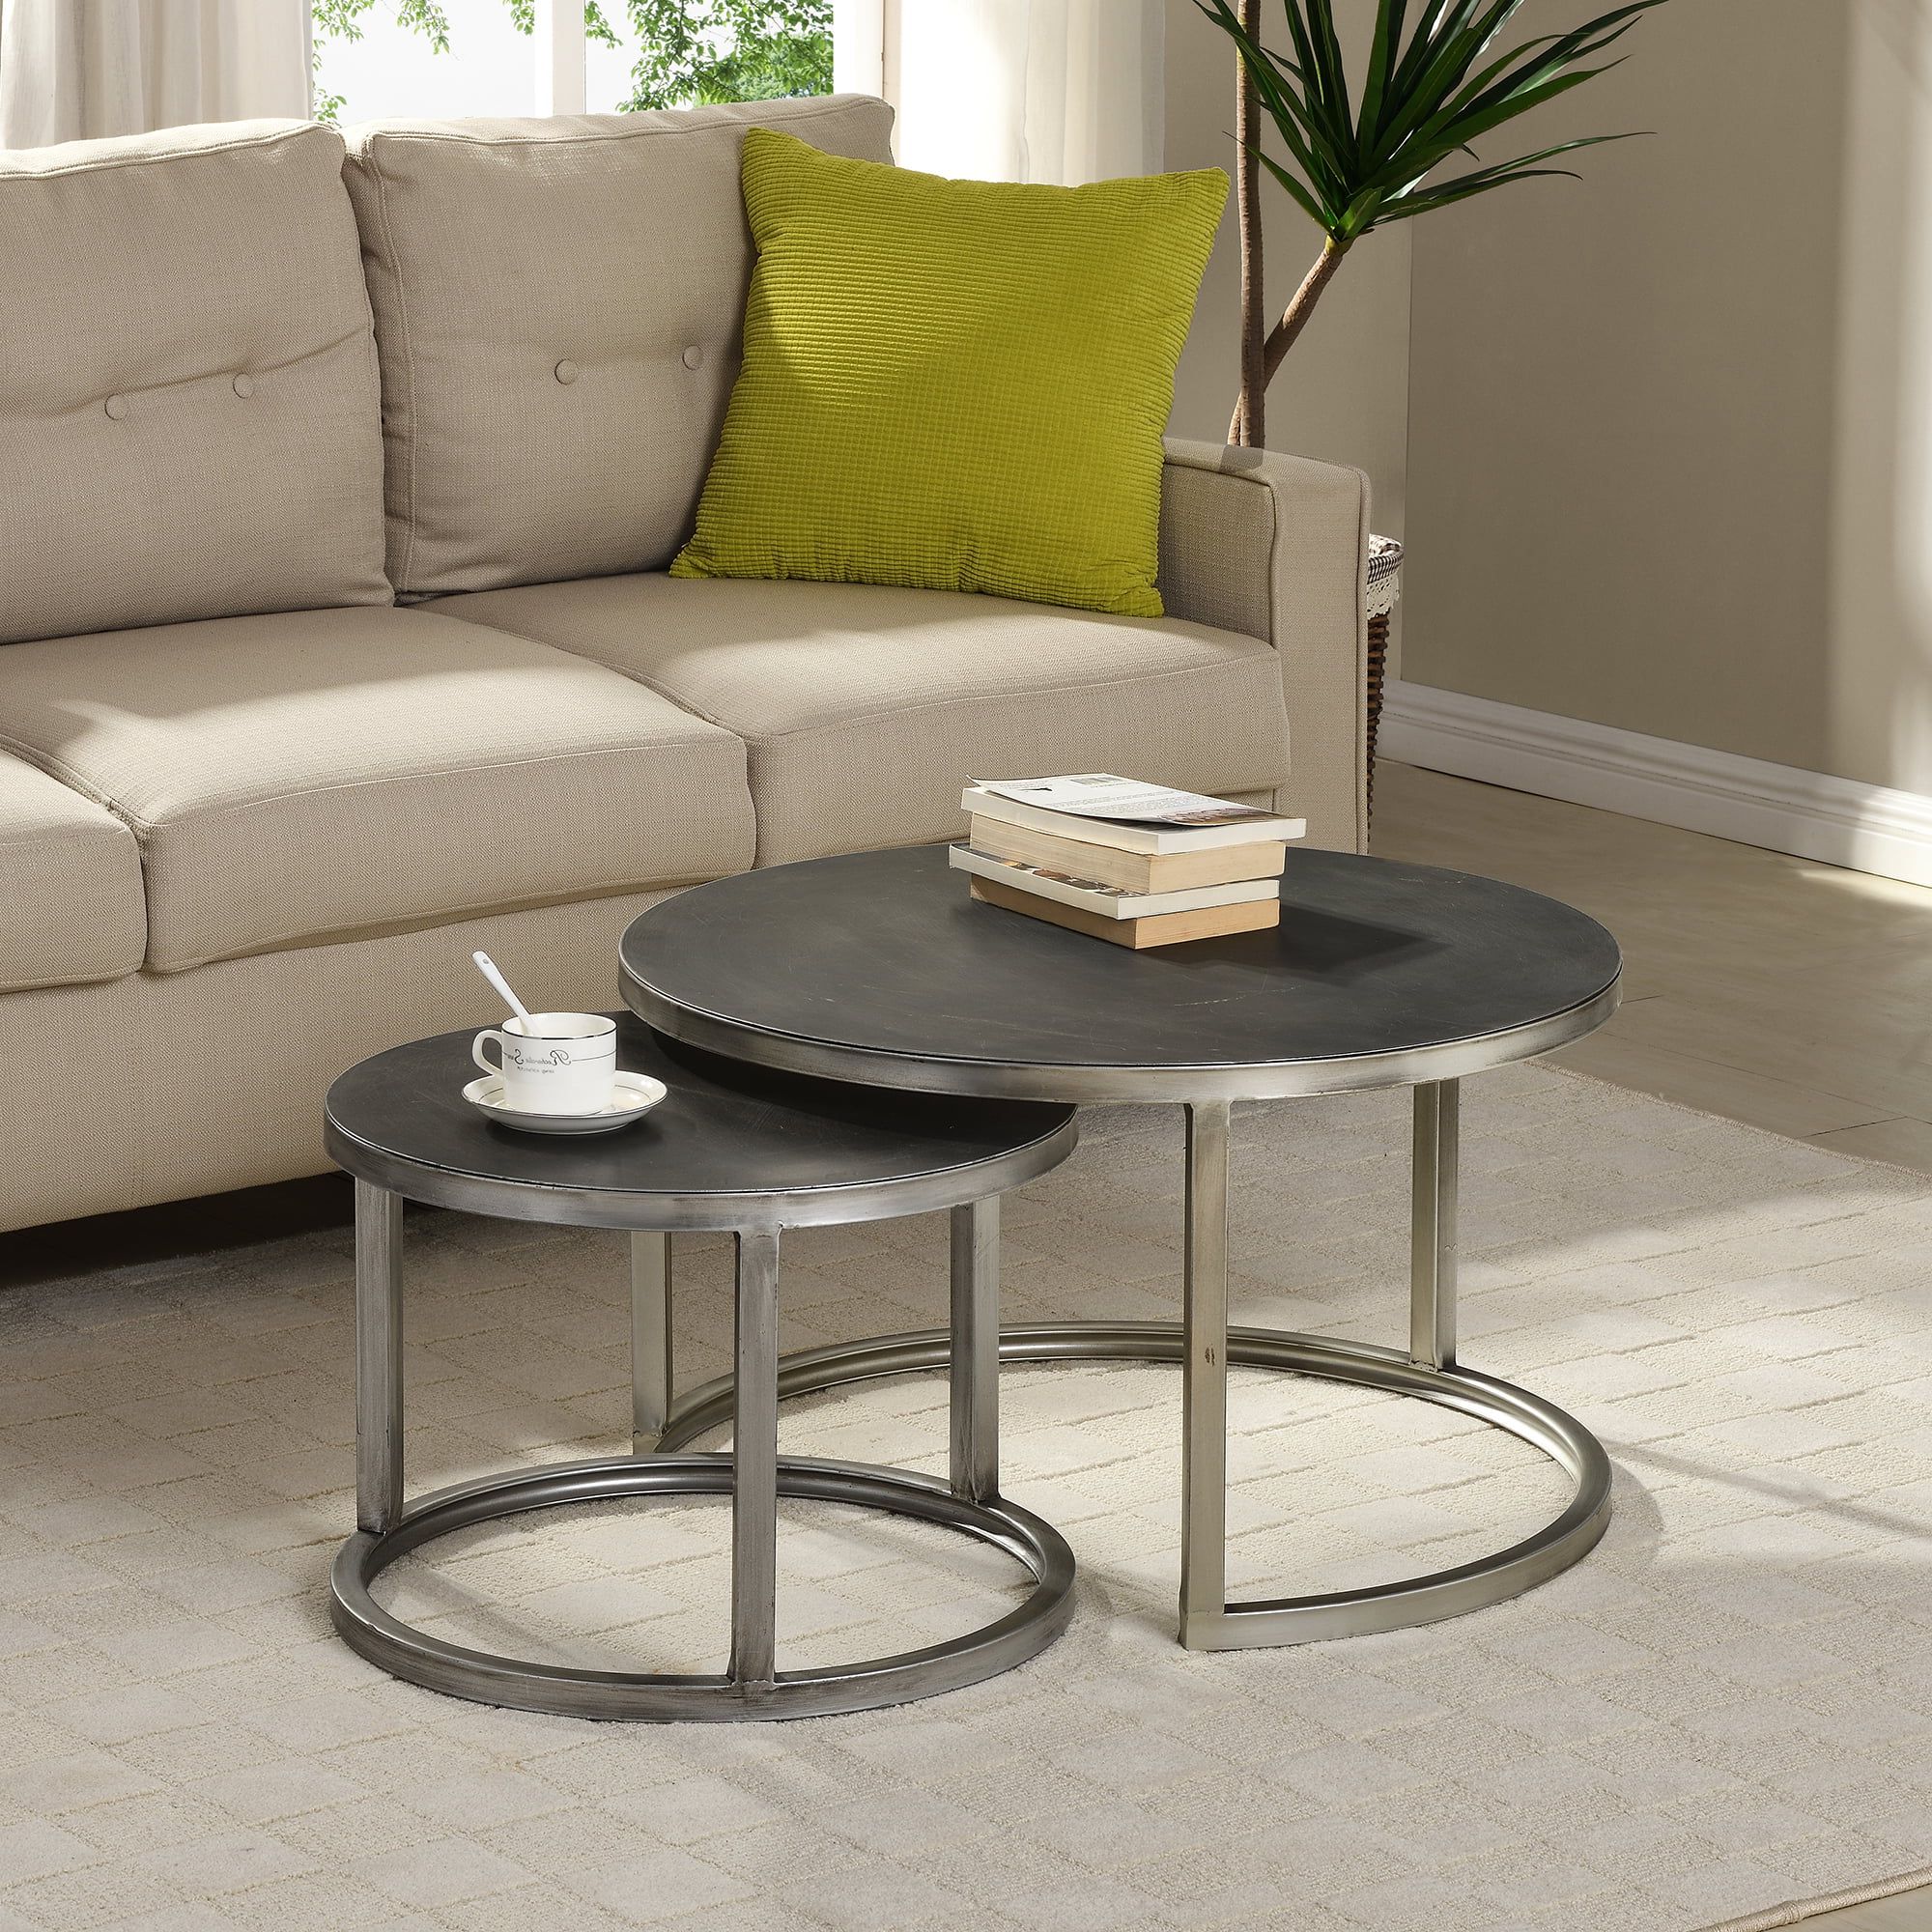 Most Recently Released Coffee Tables Of 3 Nesting Tables Intended For Nesting Coffee Table Set Rectangular / Adarn Oak Mission Design (View 10 of 15)